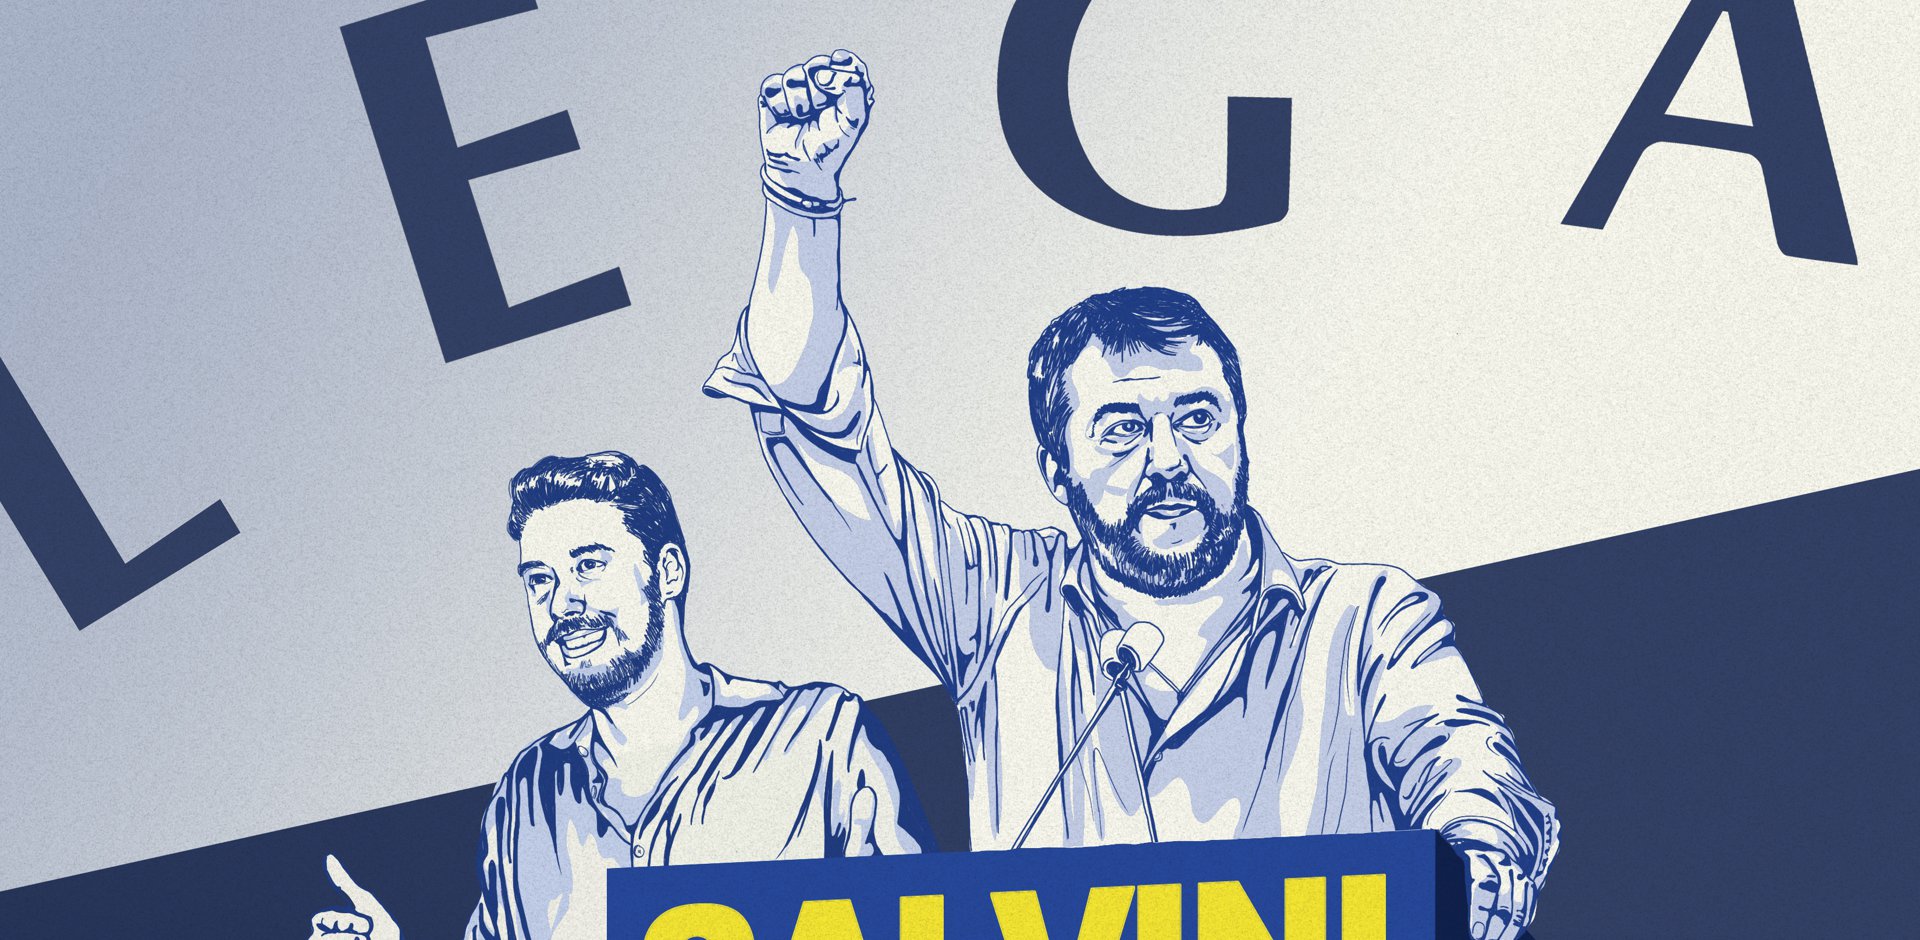 An illustration of Matteo Salvini and Luca Tocallini standing behind a lectern and in front of their party's flag.